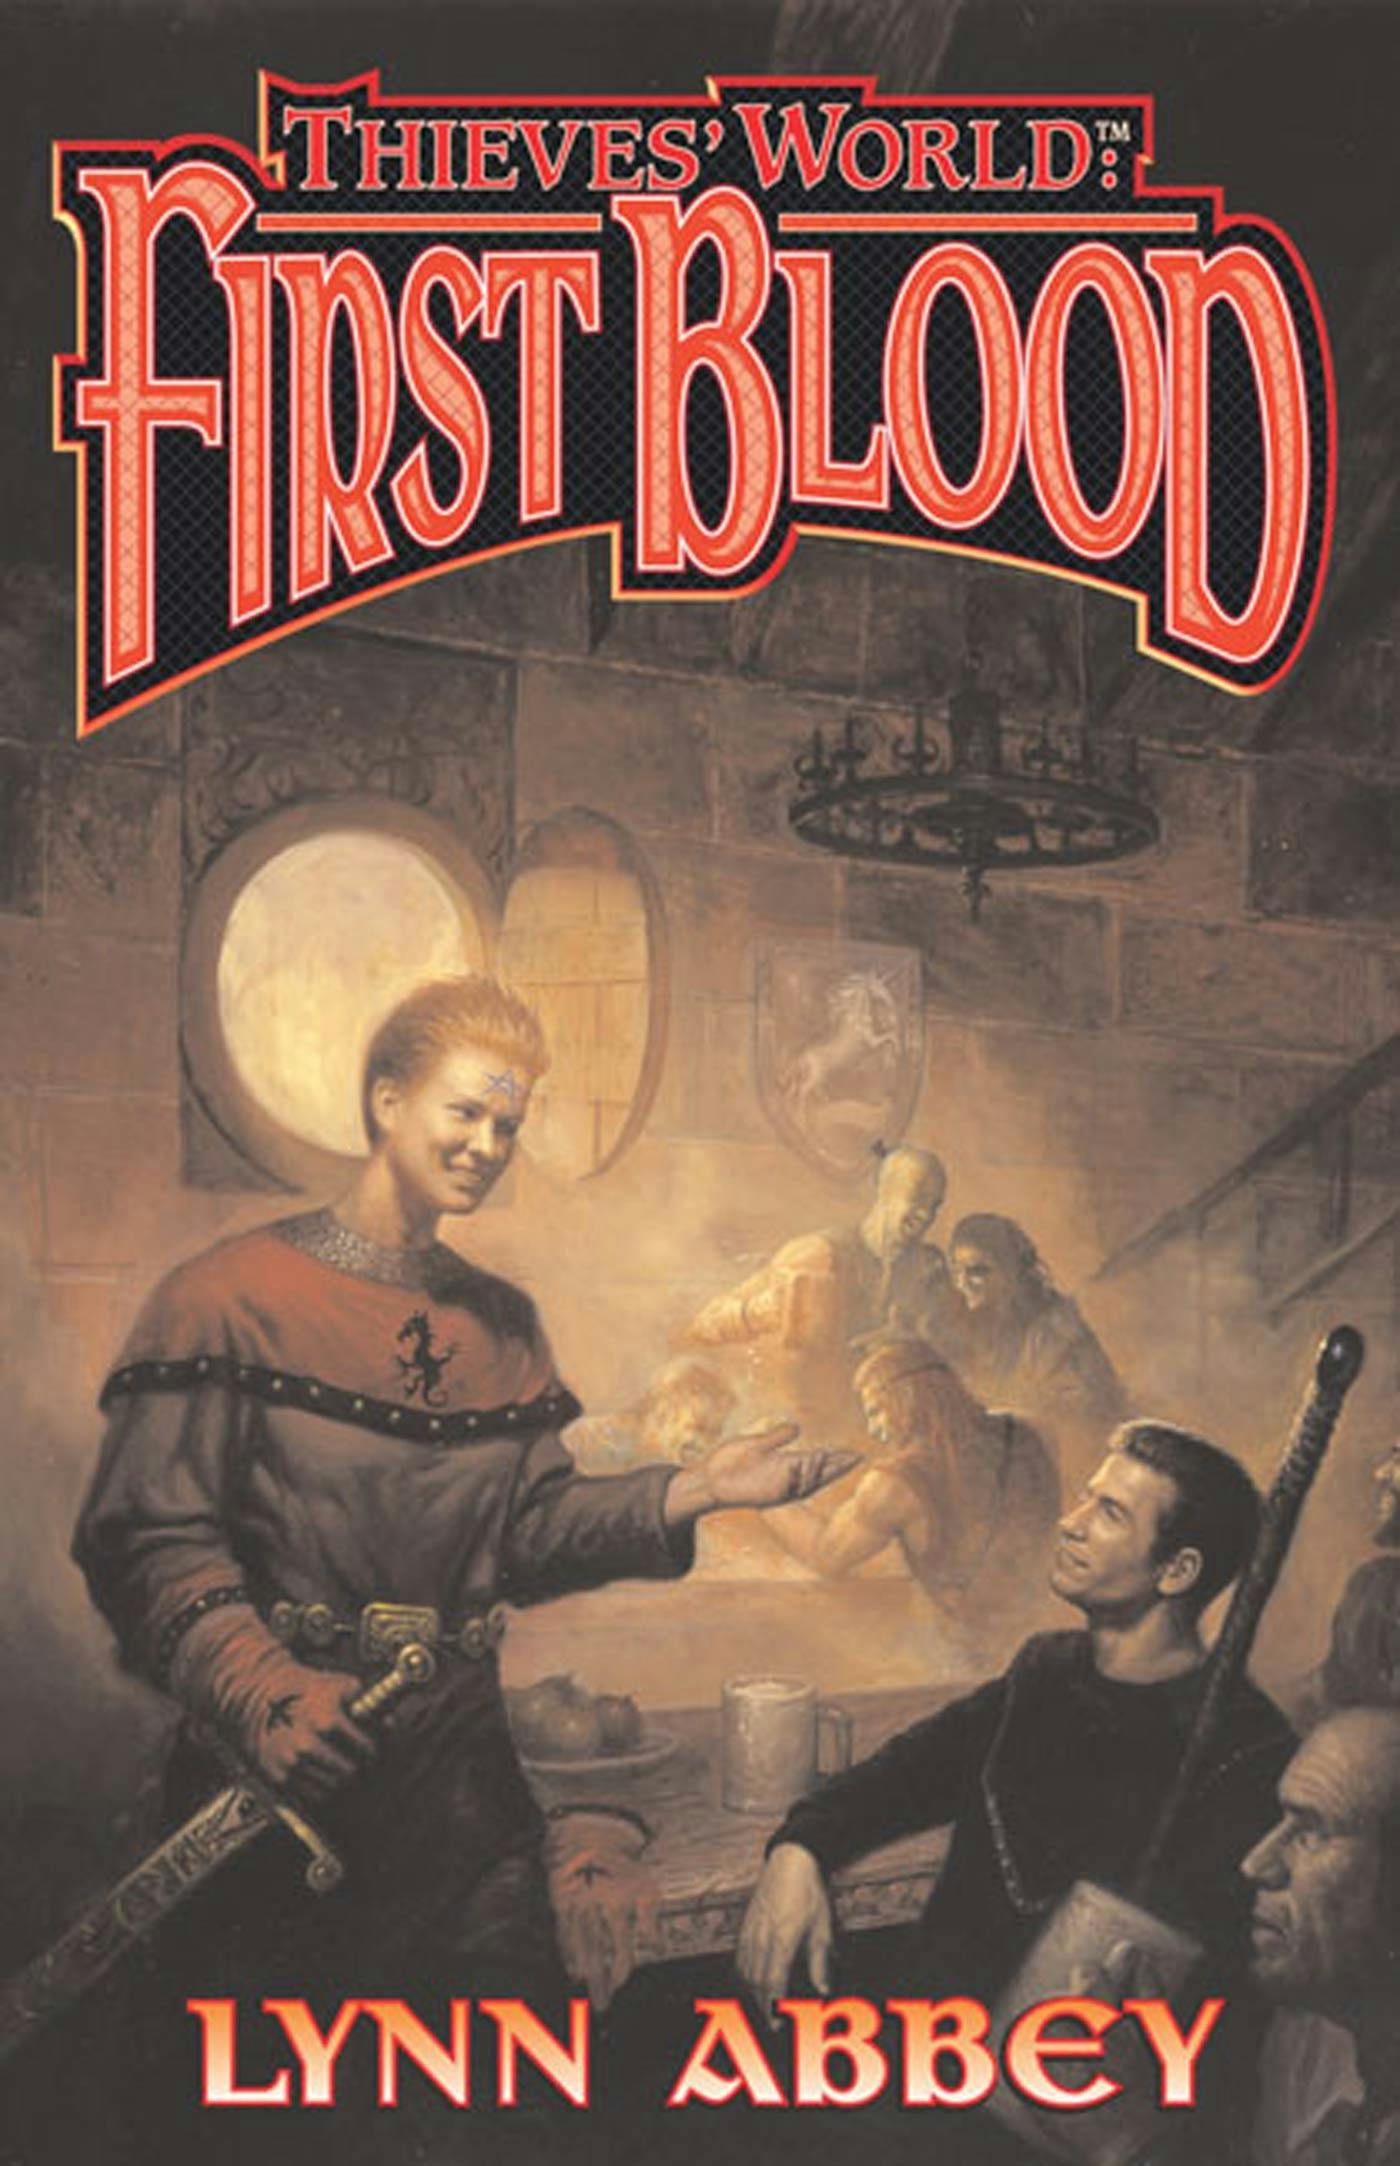 Cover for the book titled as: Thieves' World: First Blood